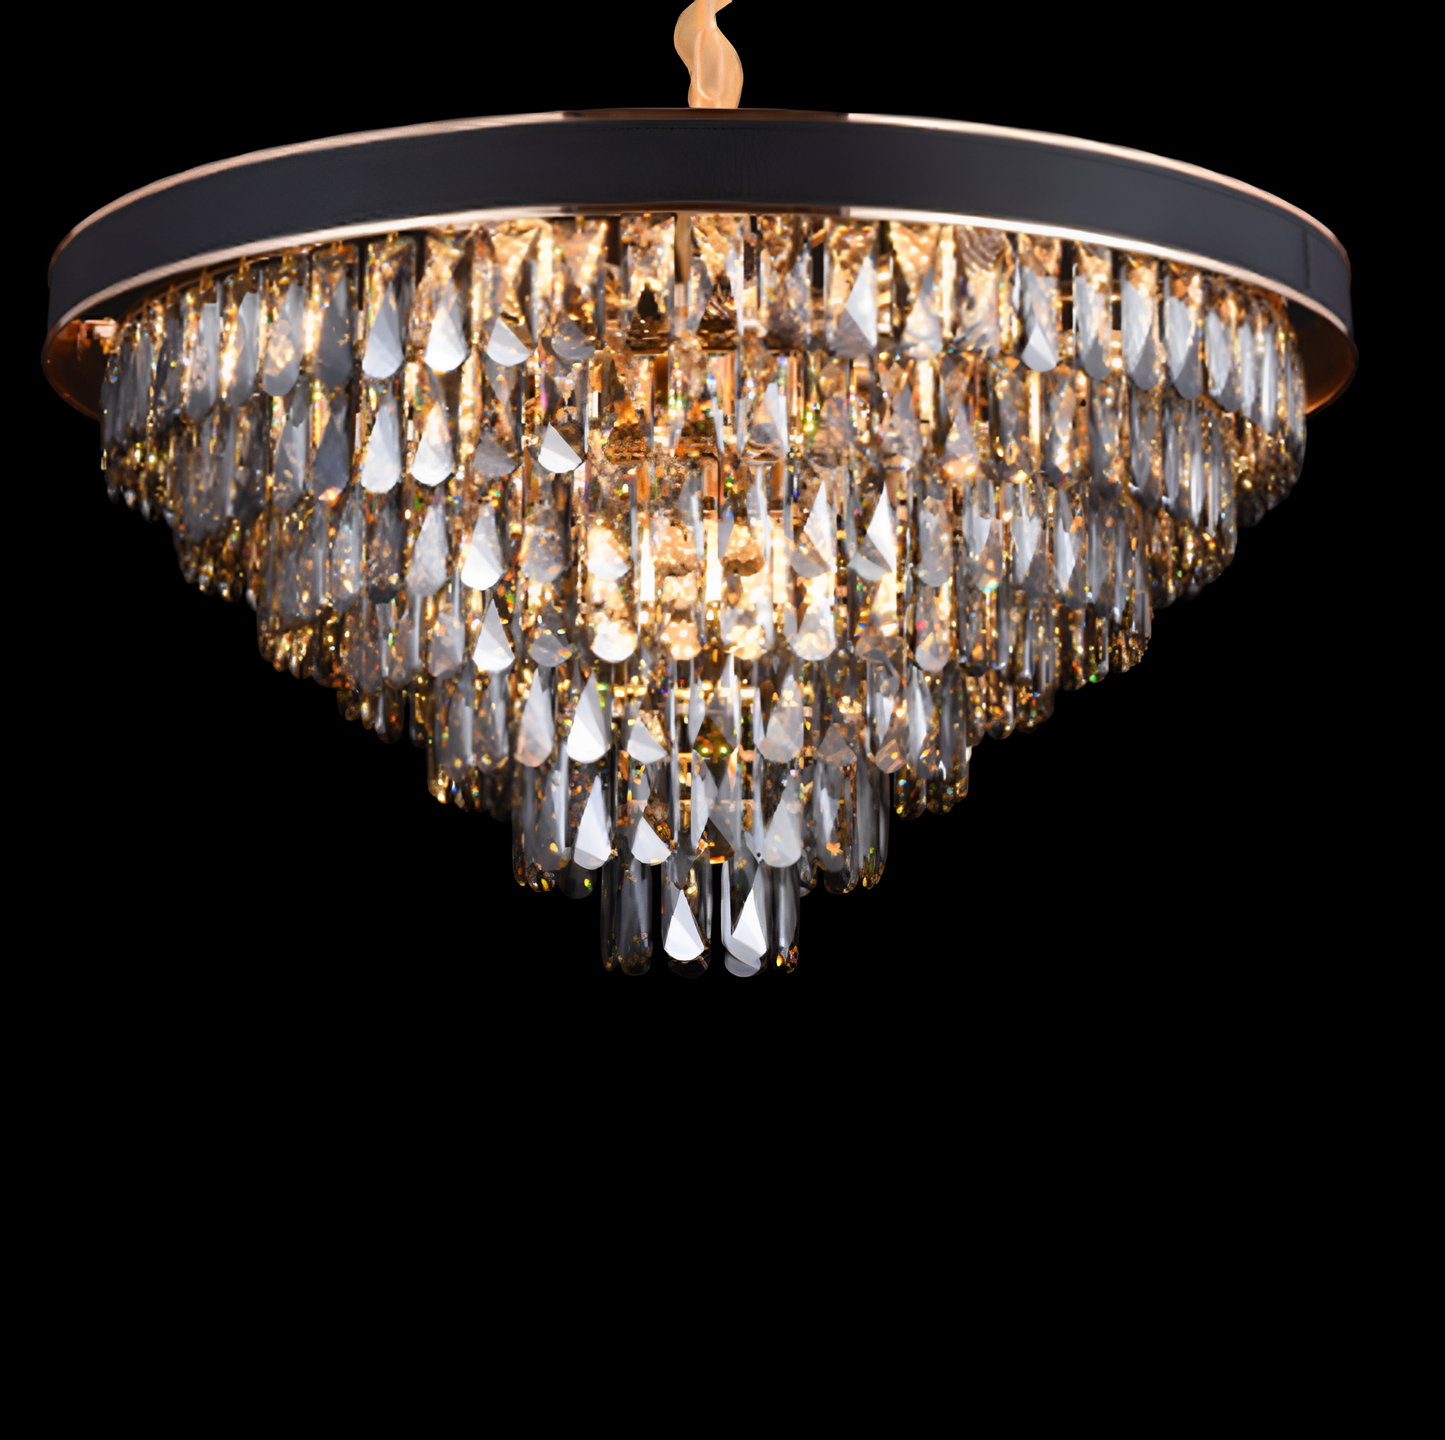 Rose Gold Brilliance Crystal Chandelier by Gloss (SR1230/80)